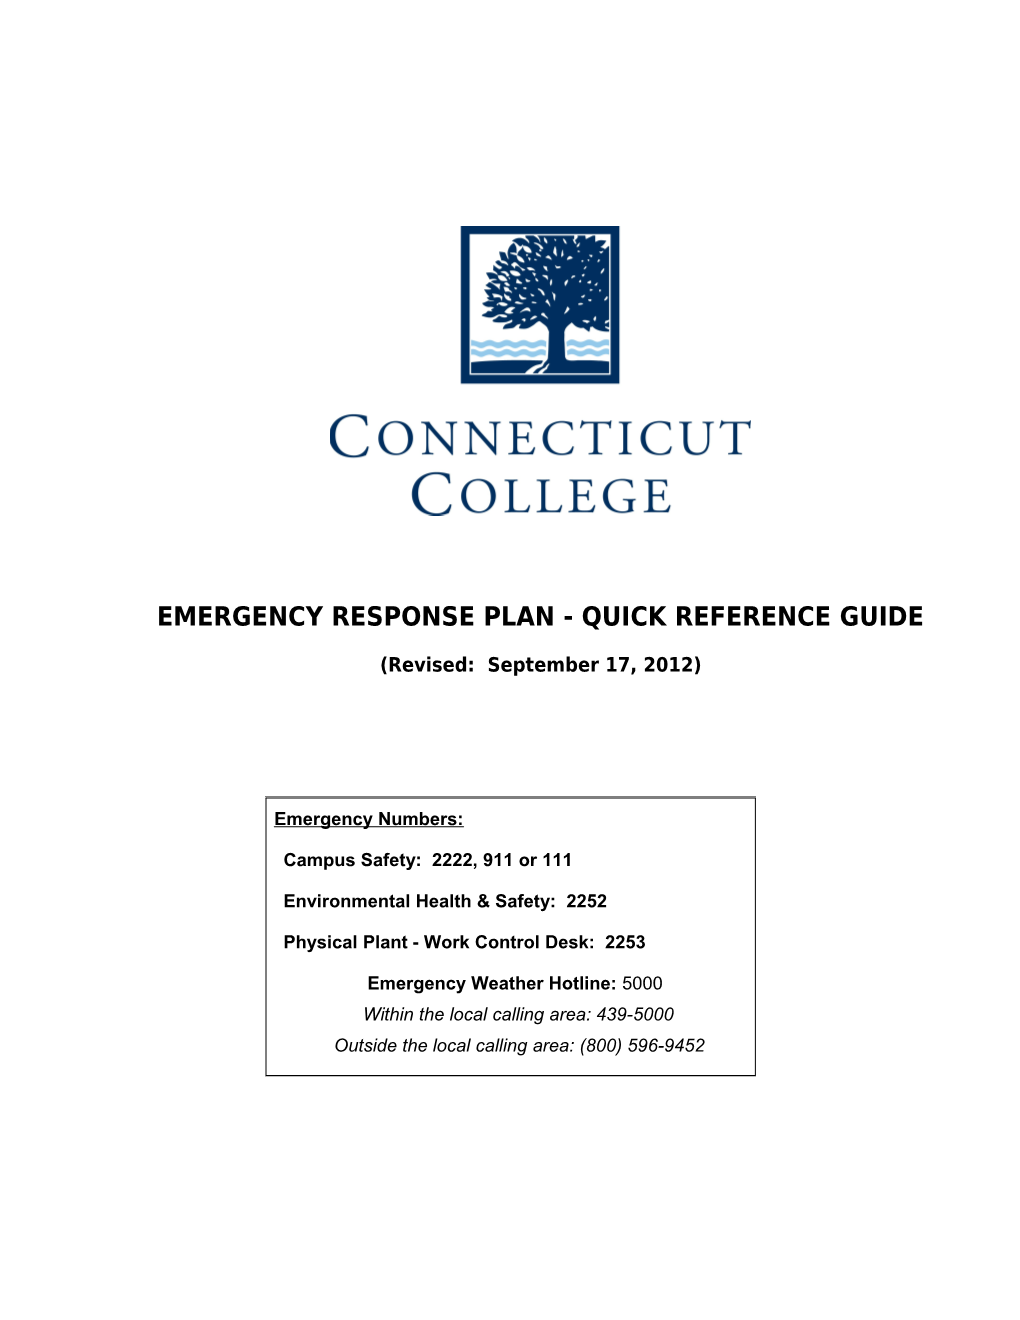 Emergency Response Plan - Quick Reference Guide